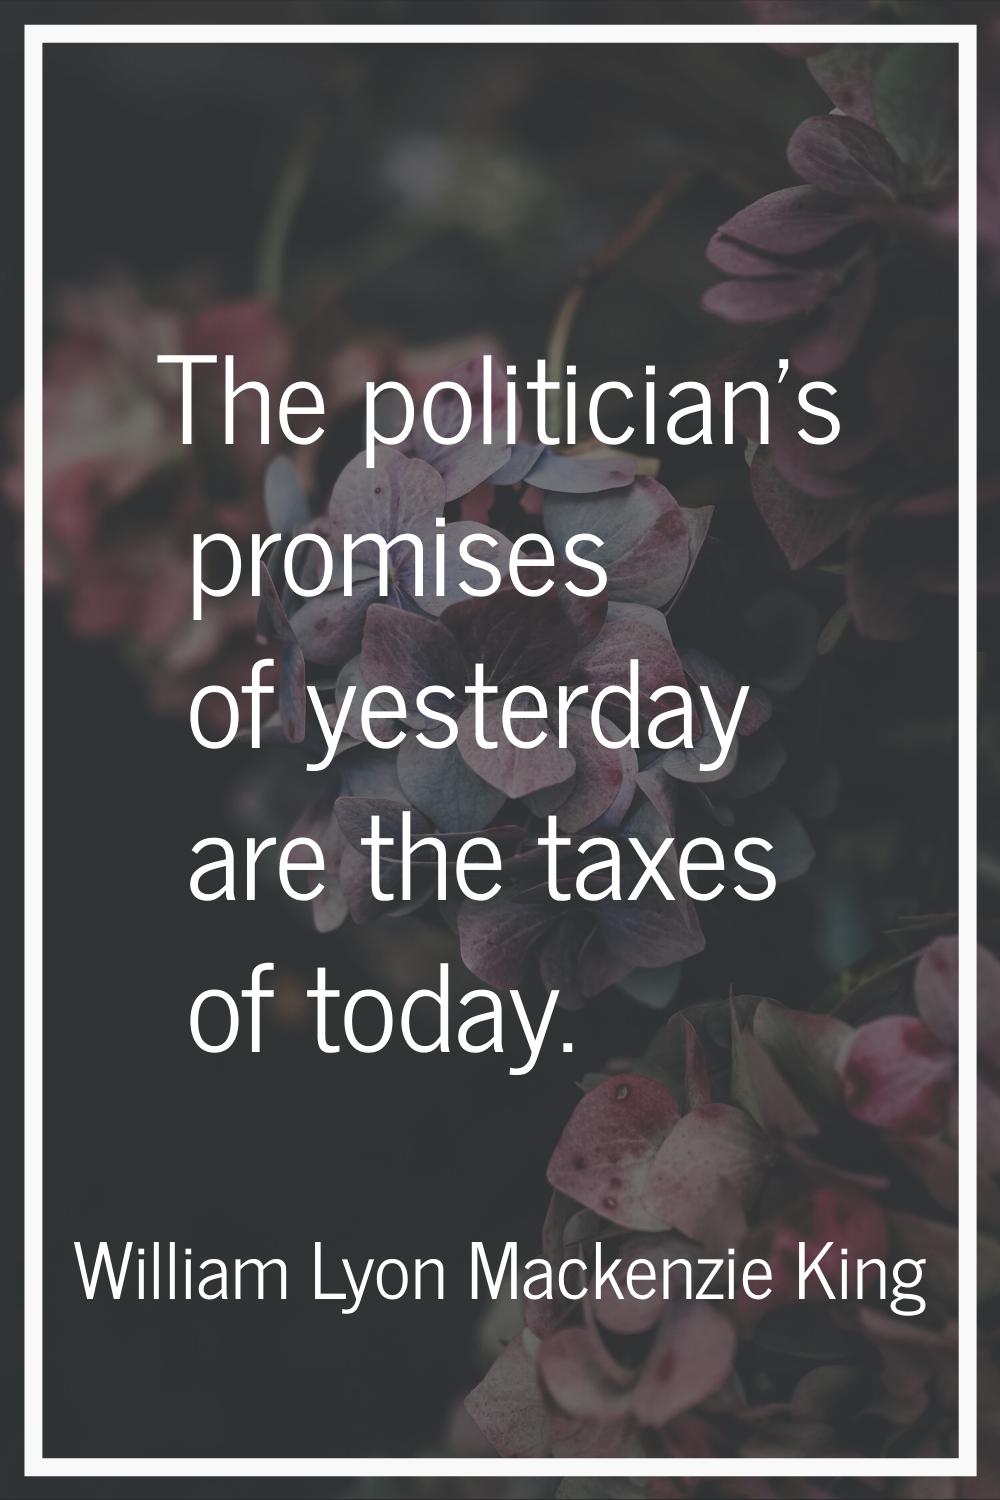 The politician's promises of yesterday are the taxes of today.